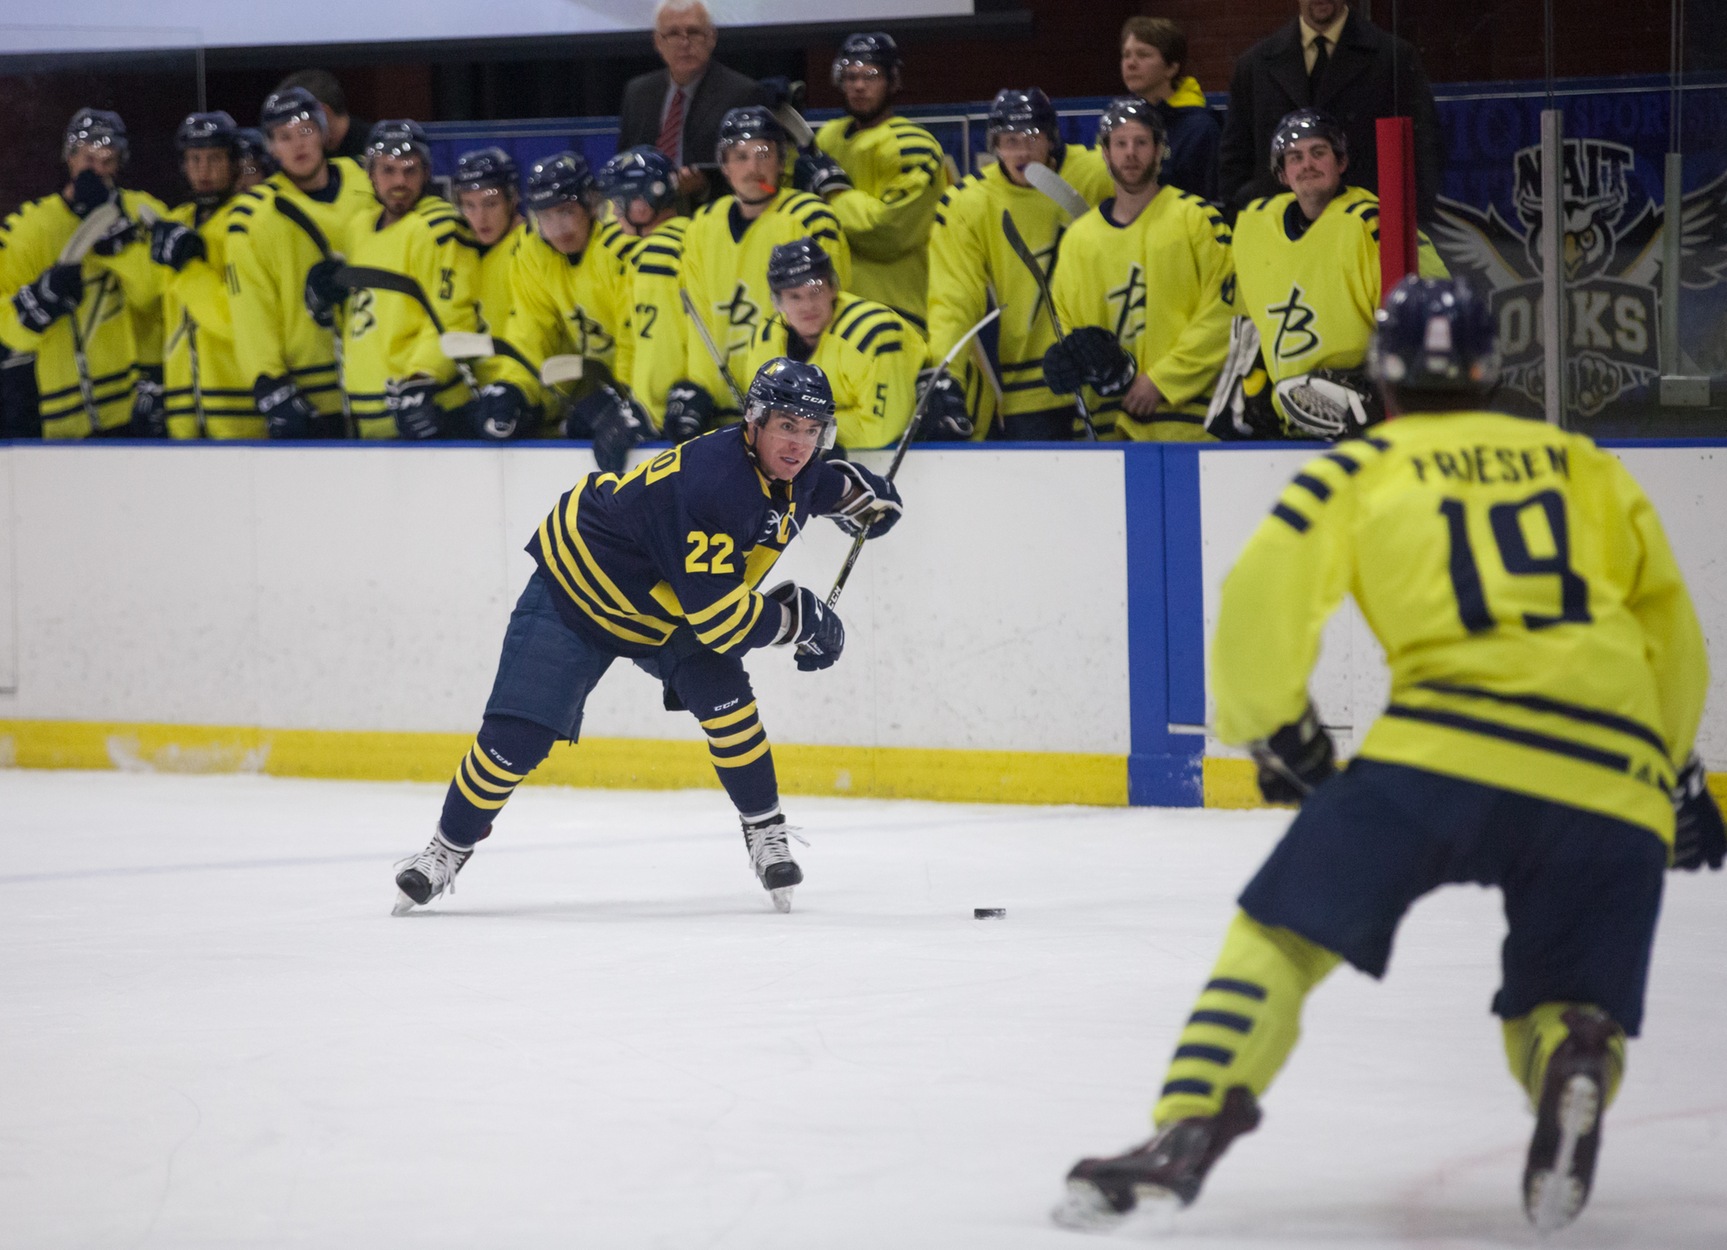 OOKS SWEEP ON THE ROAD